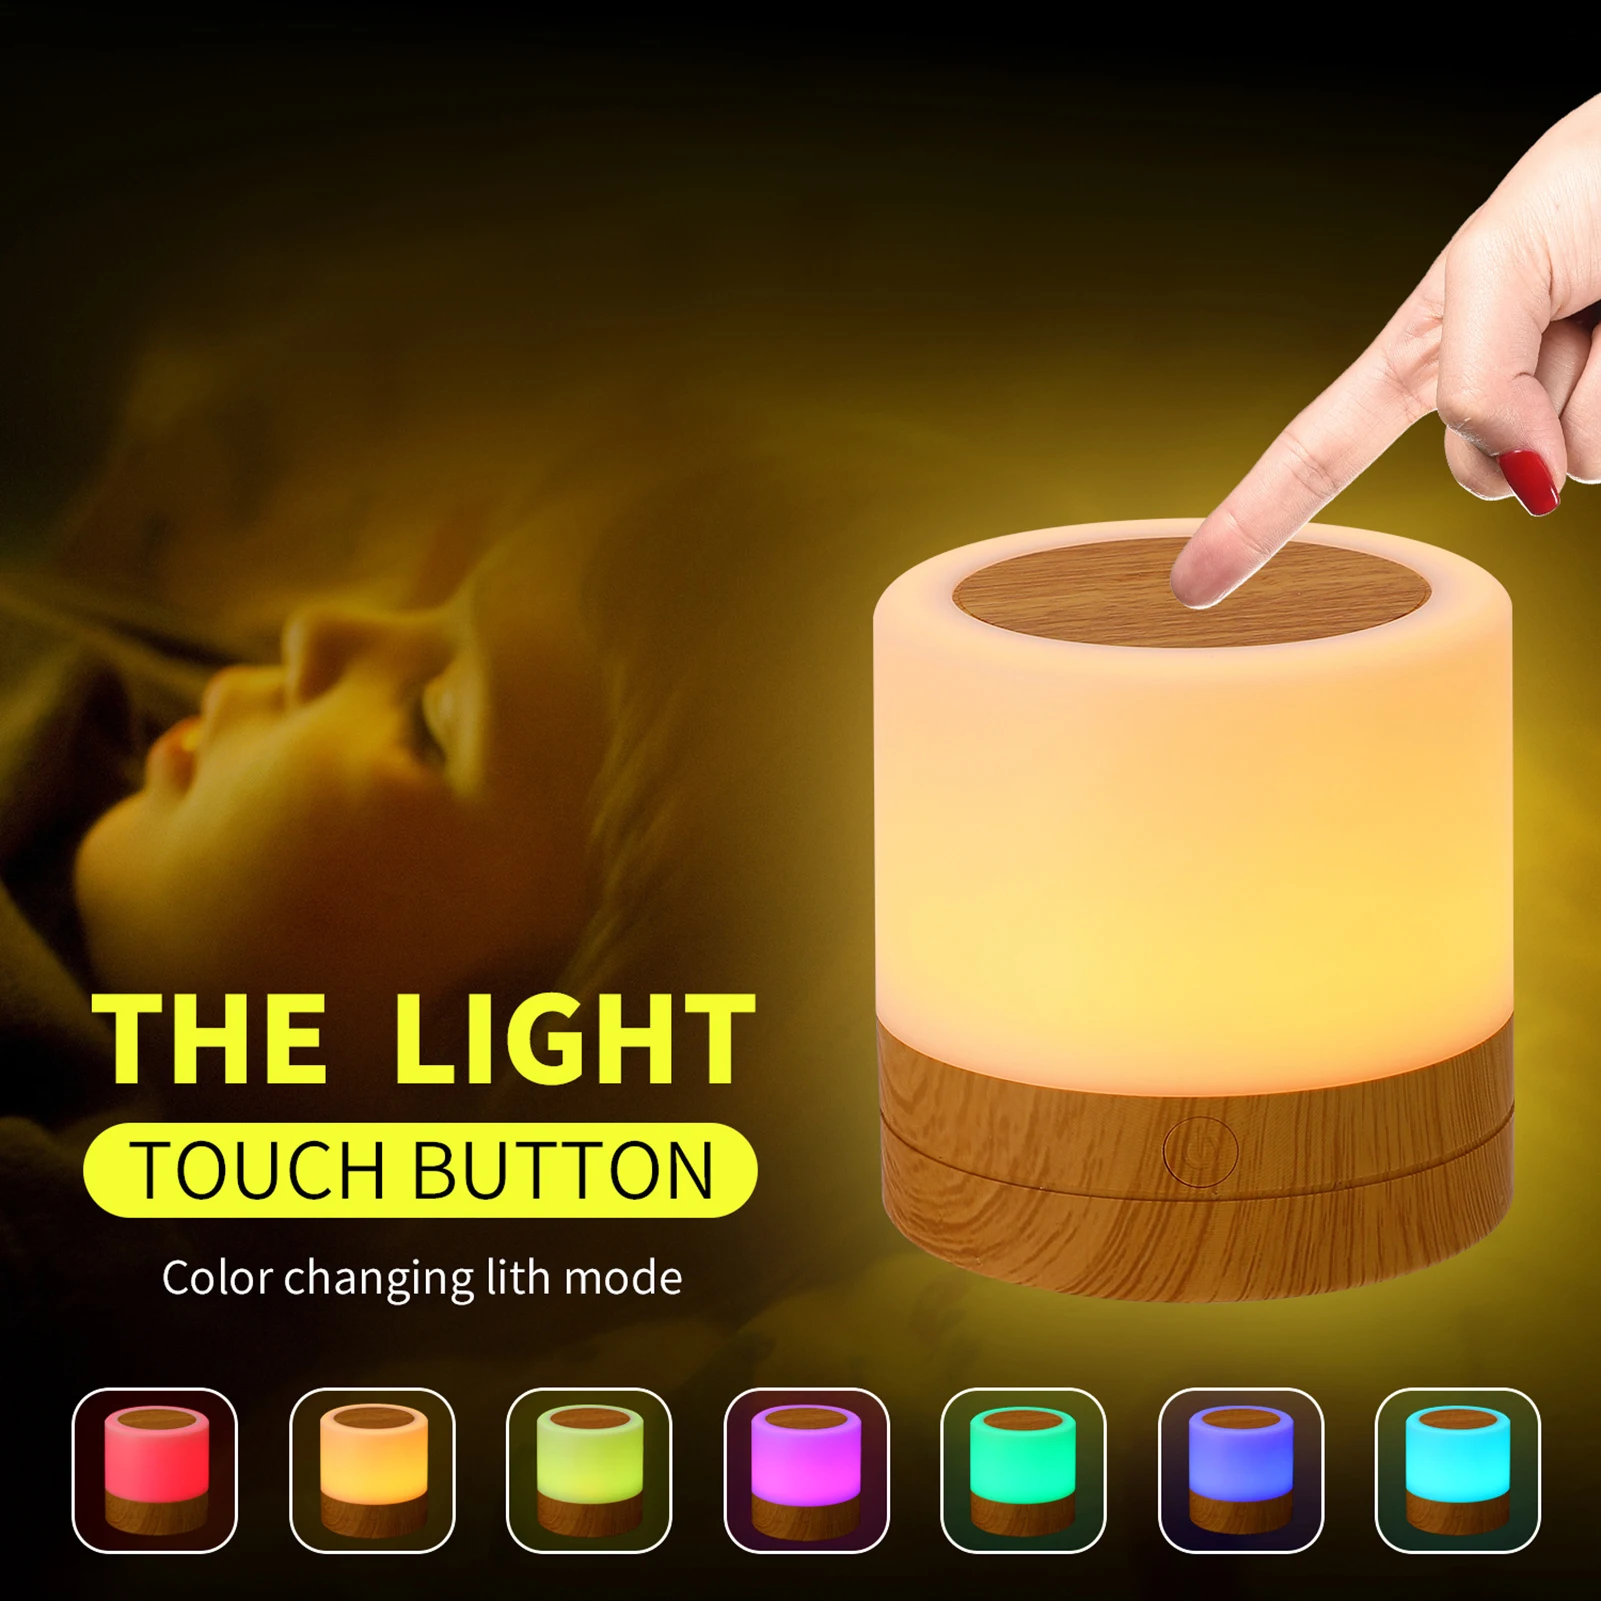 

Touching Control 3W DC5V Desktop Leds Colorful Night Light Bedroom Bedside Light USB RGB Night Lamp with Remote-Controller Timer